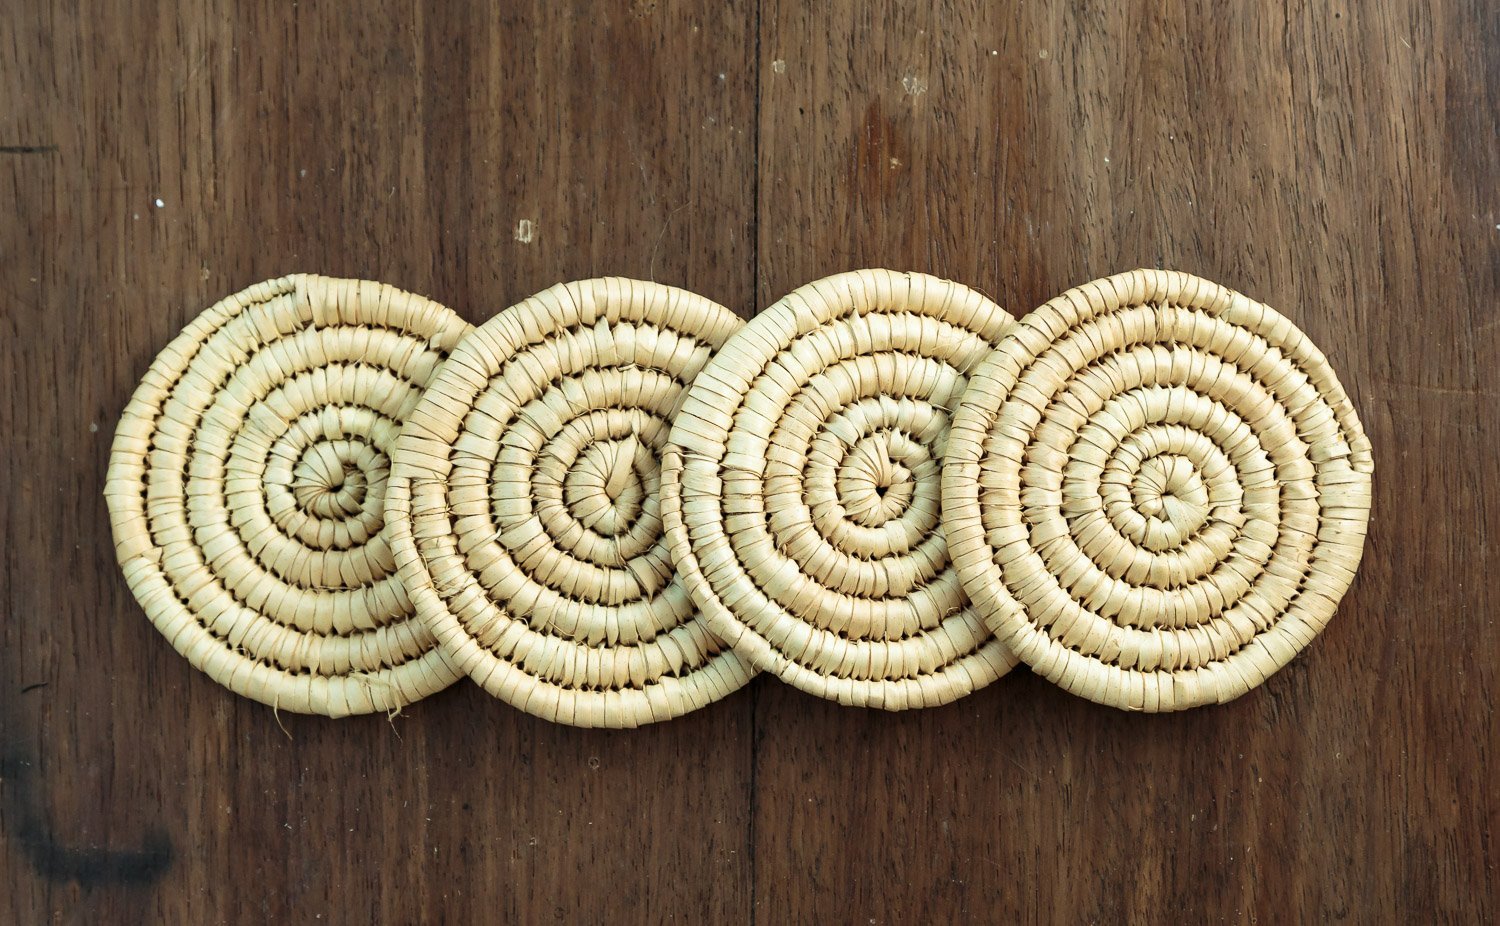 Woven Coasters Set - Coil - Weaving by TRIBAL TEXTILES - Handcrafted Home Decor Interiors - African Made